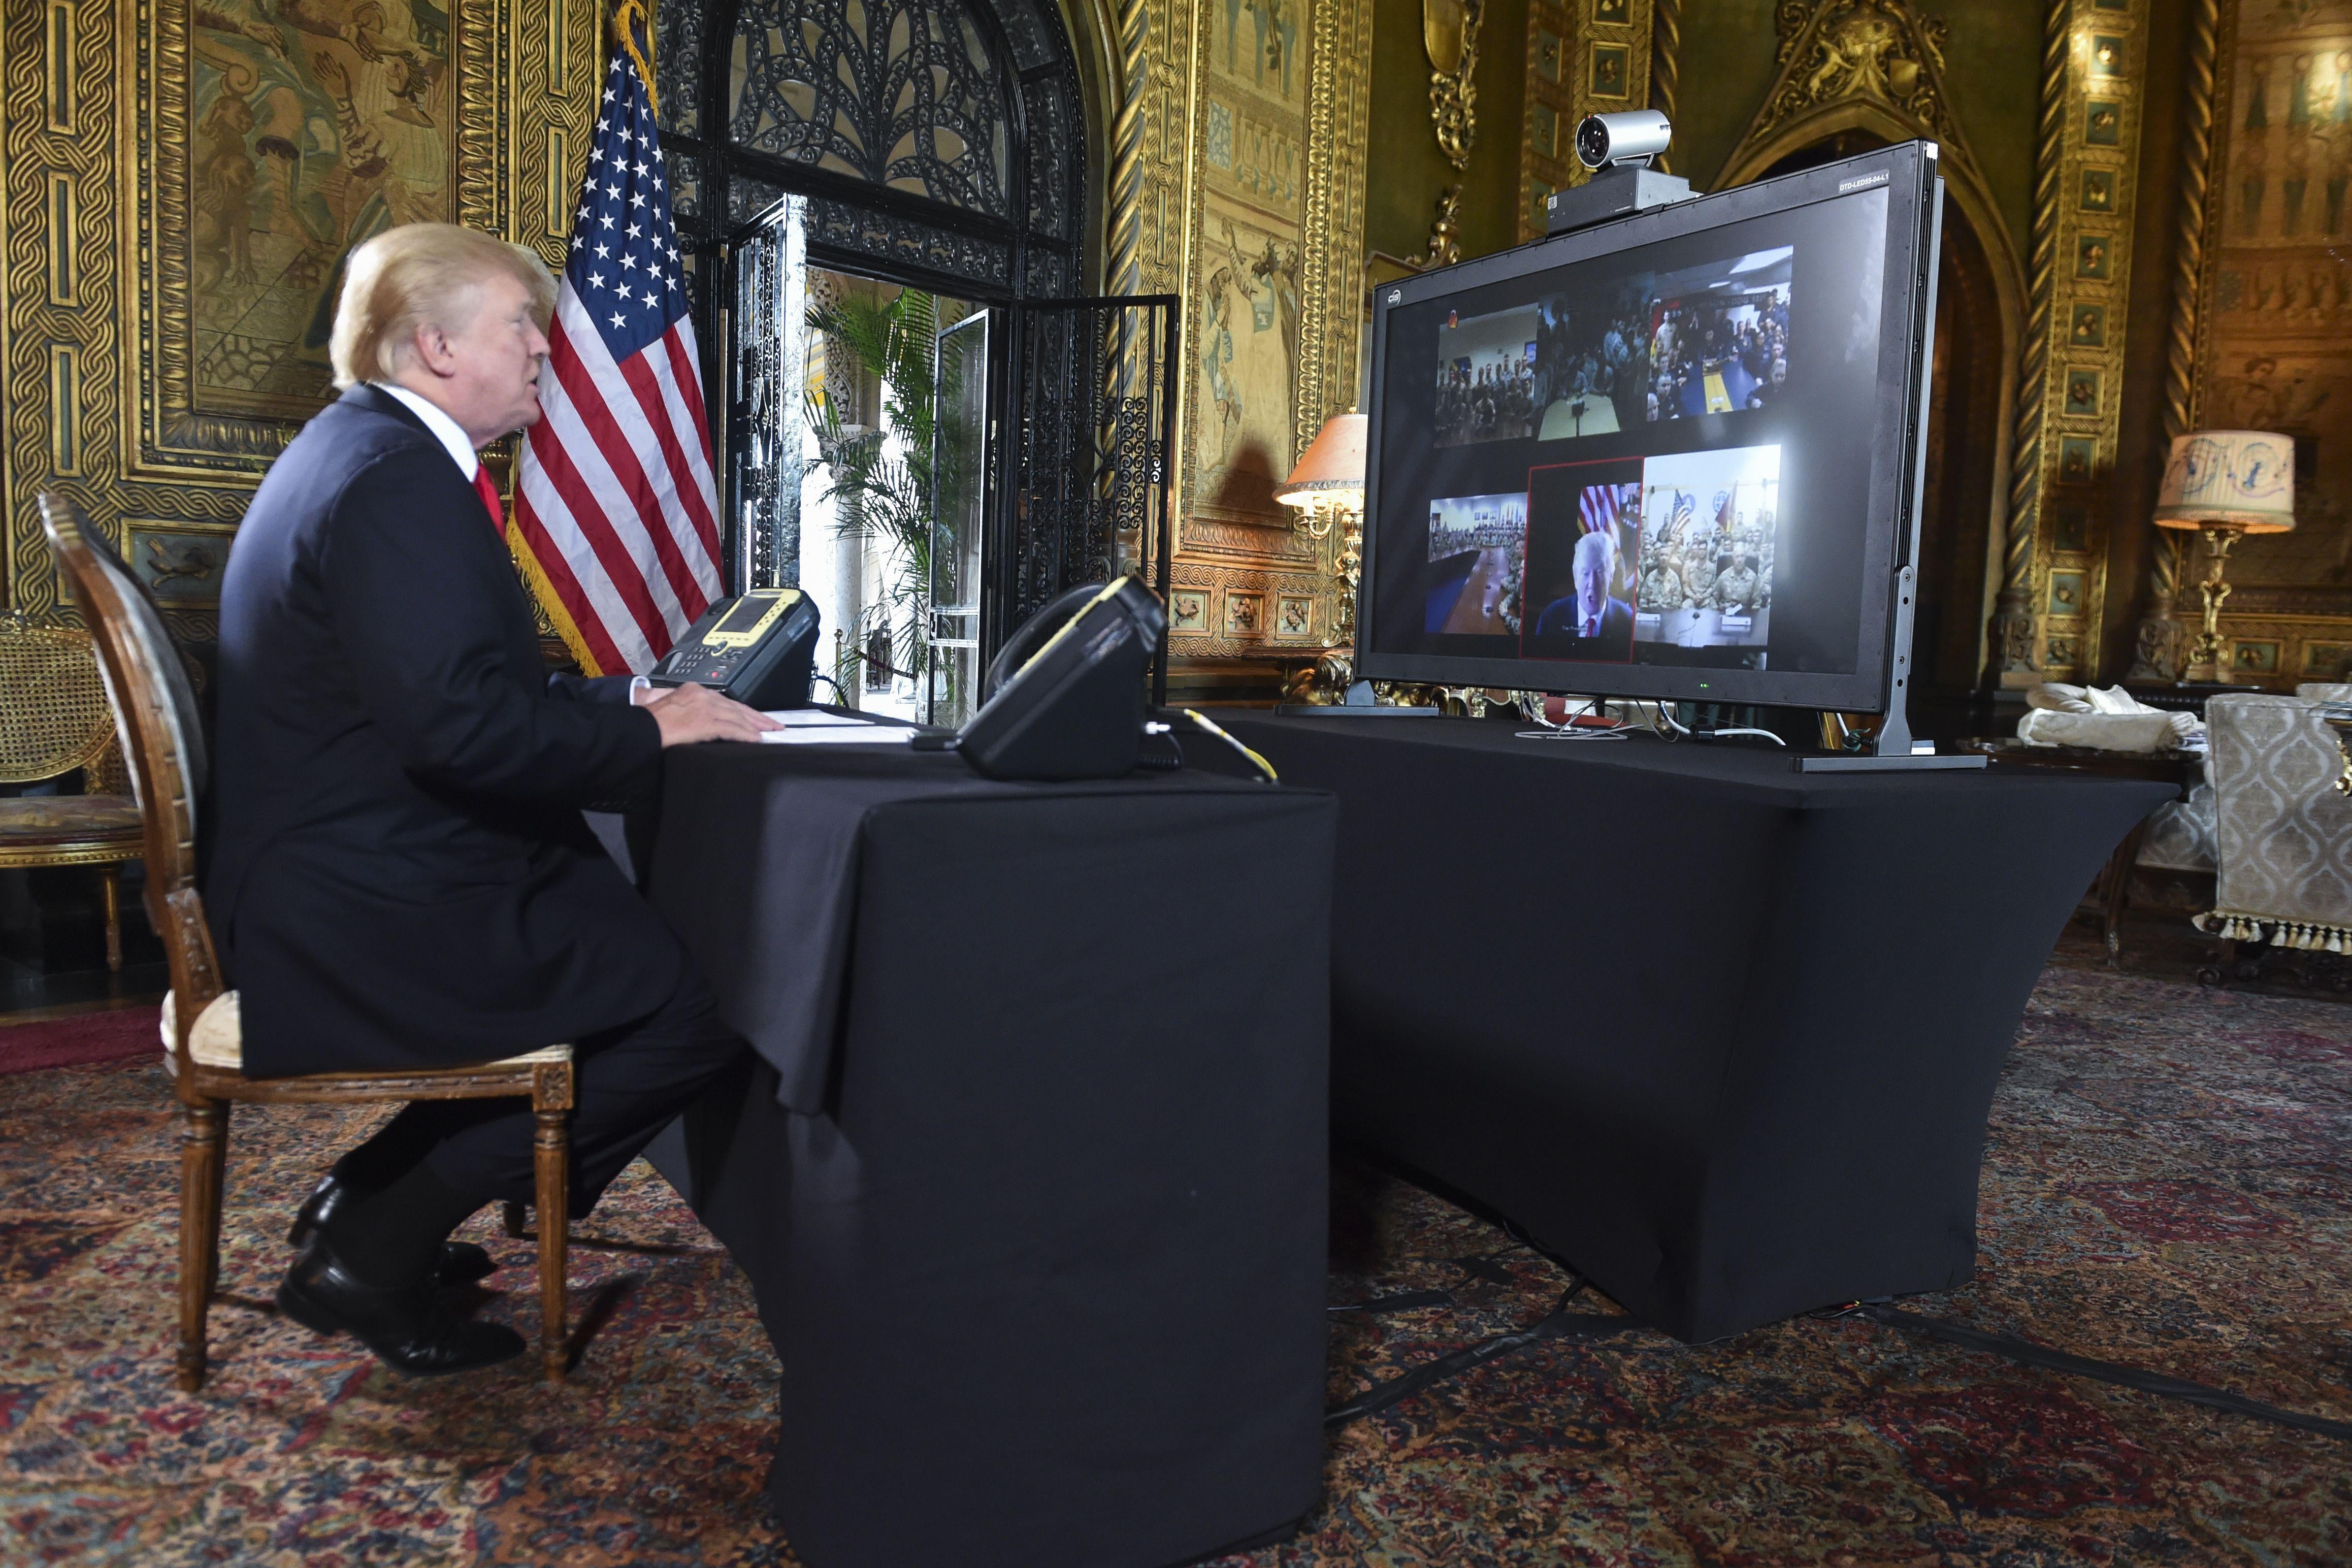 President Donald J. Trump participates in a video teleconference call with military members on Christmas Eve in Palm Beach, Florida on December 24, 2017.  